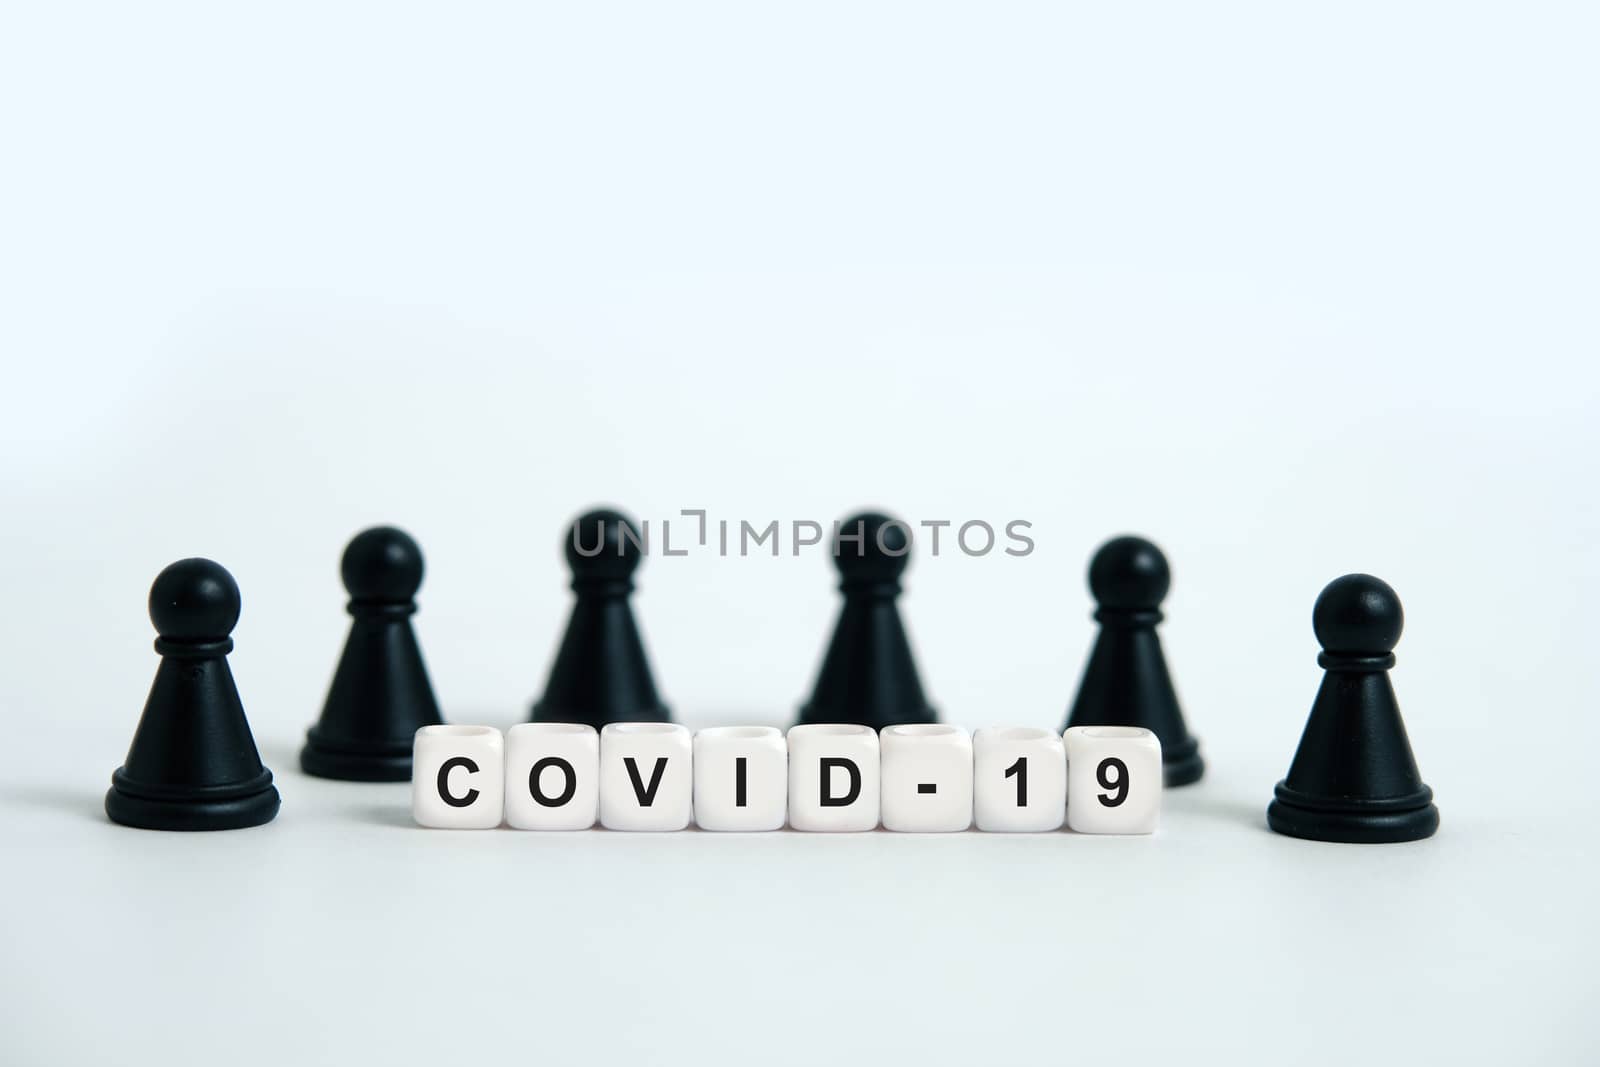 Pandemic coronavirus conceptual photography – stop spreading of COVID19 - word beads surrounded by chess pieces by Macrostud